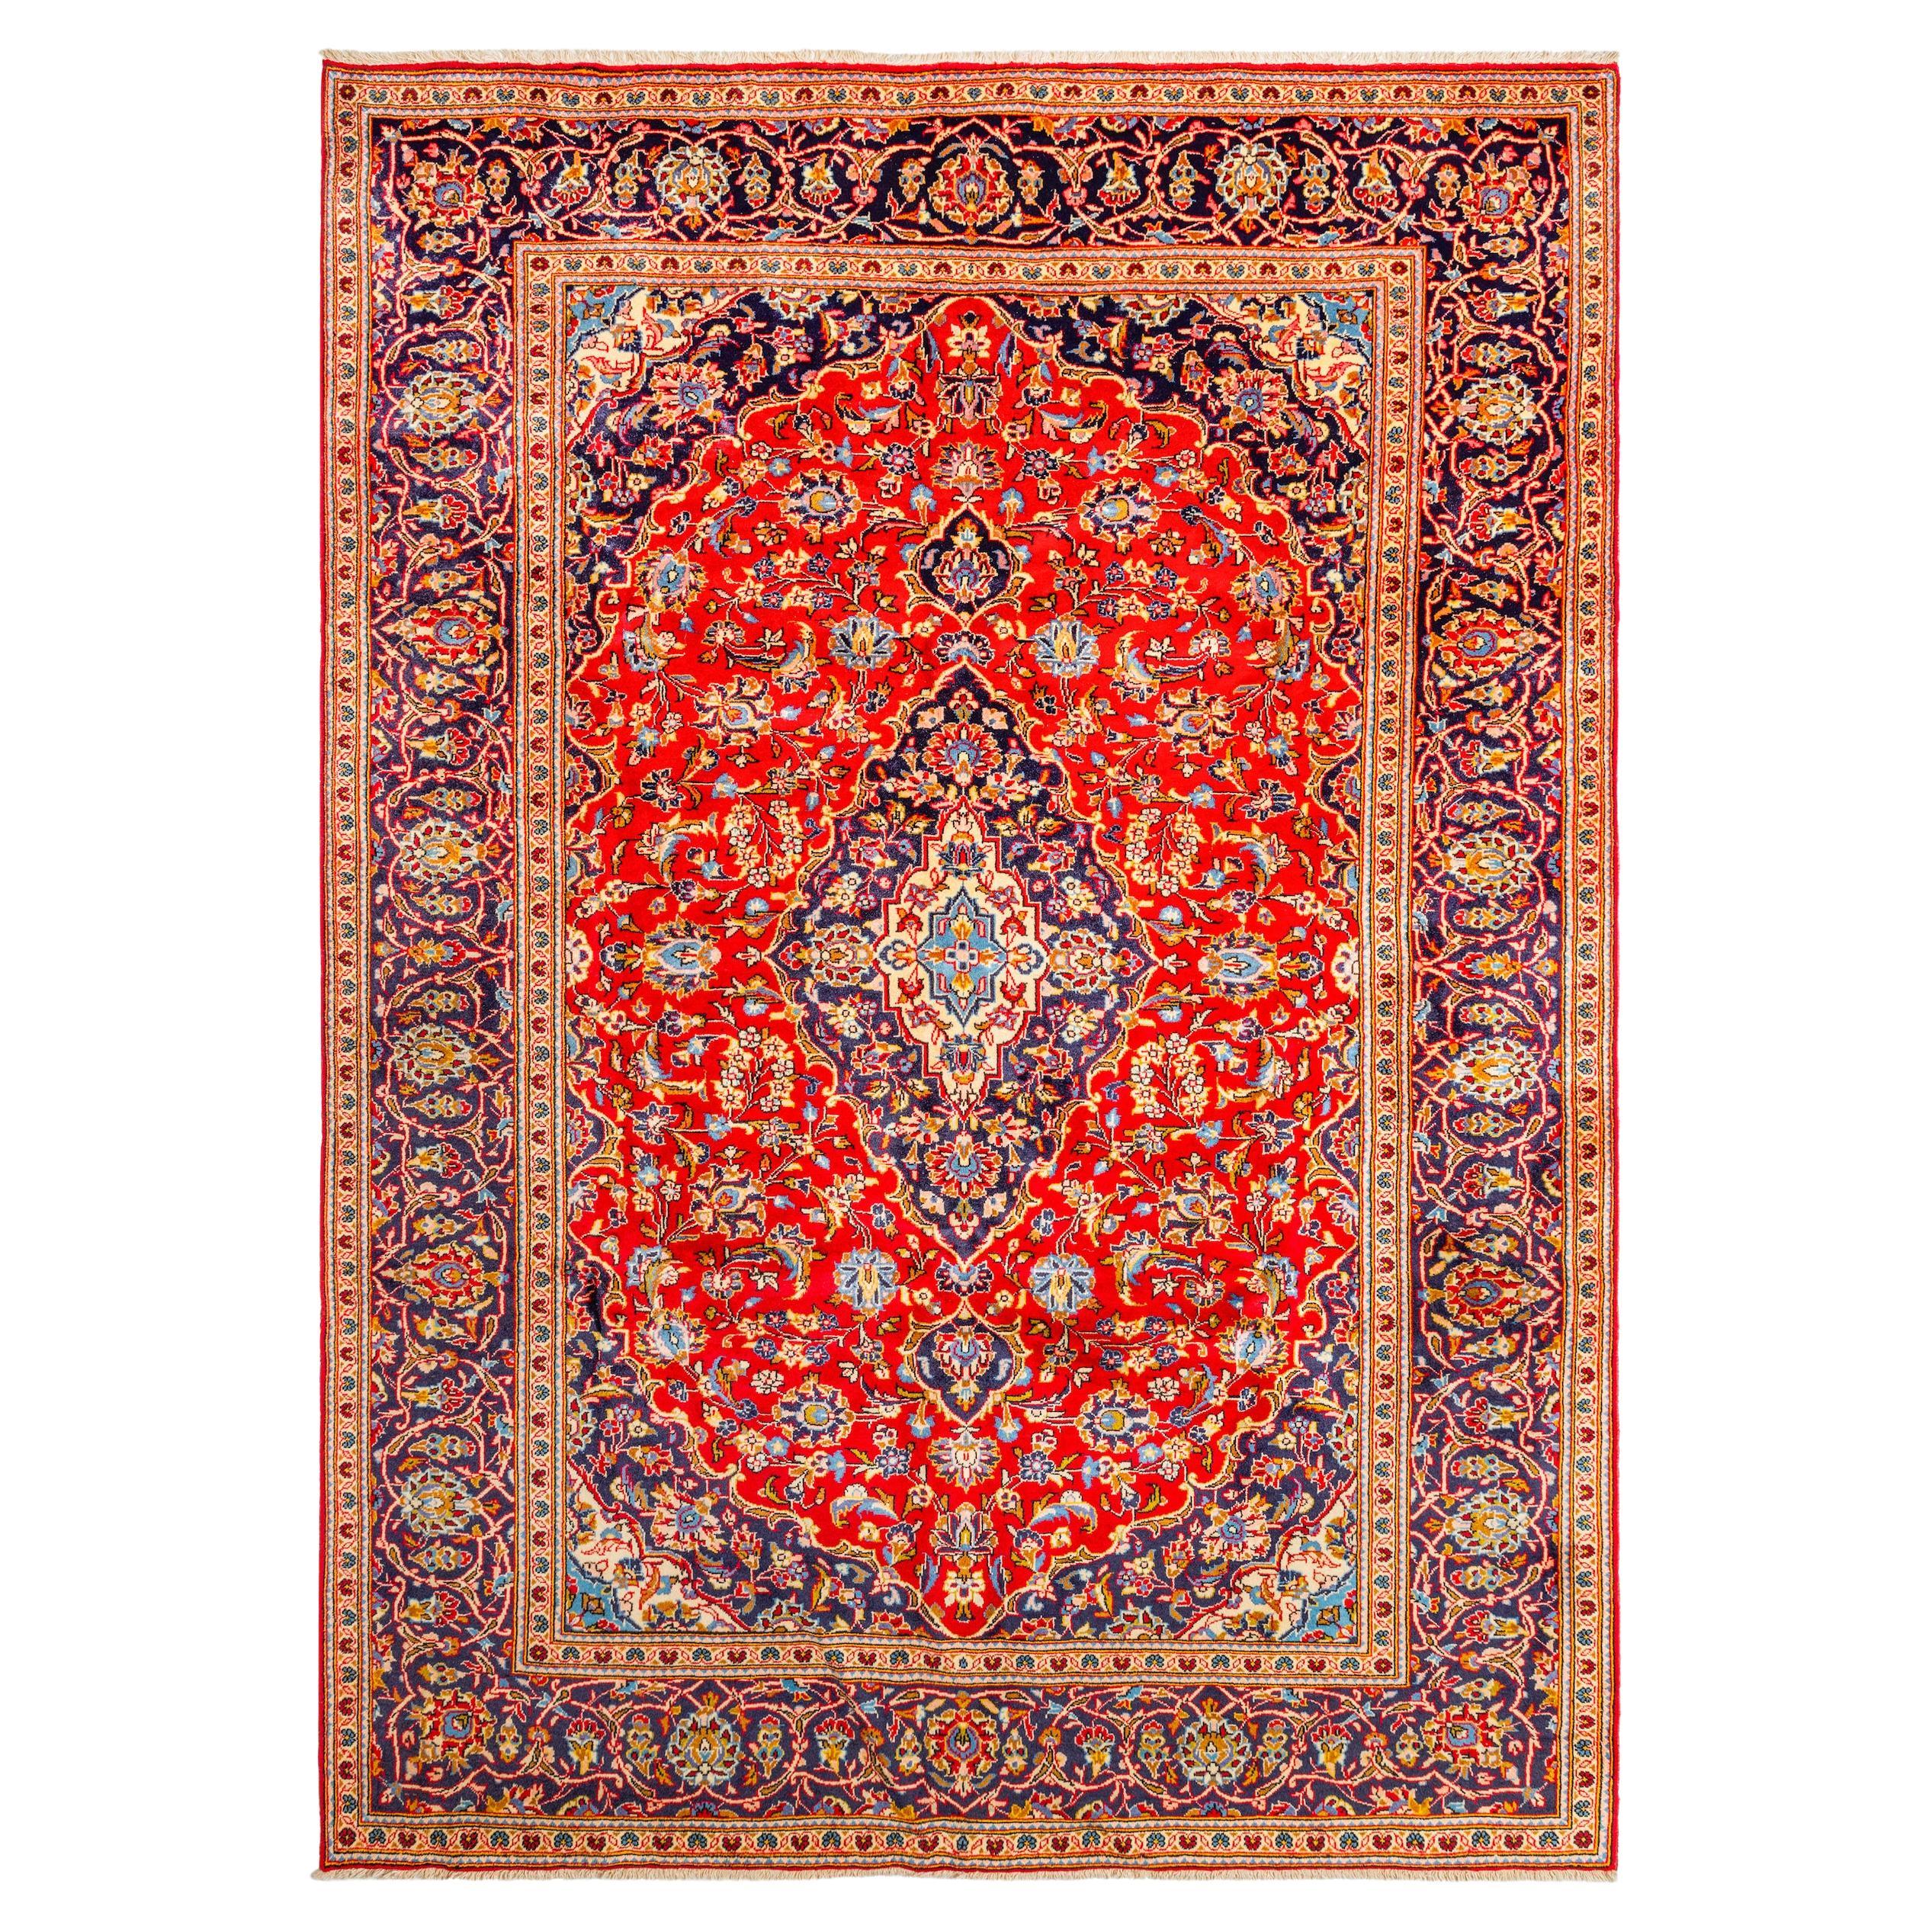 Authentic Persian Area Rug Floral Red 9' 3" x 6' 9"